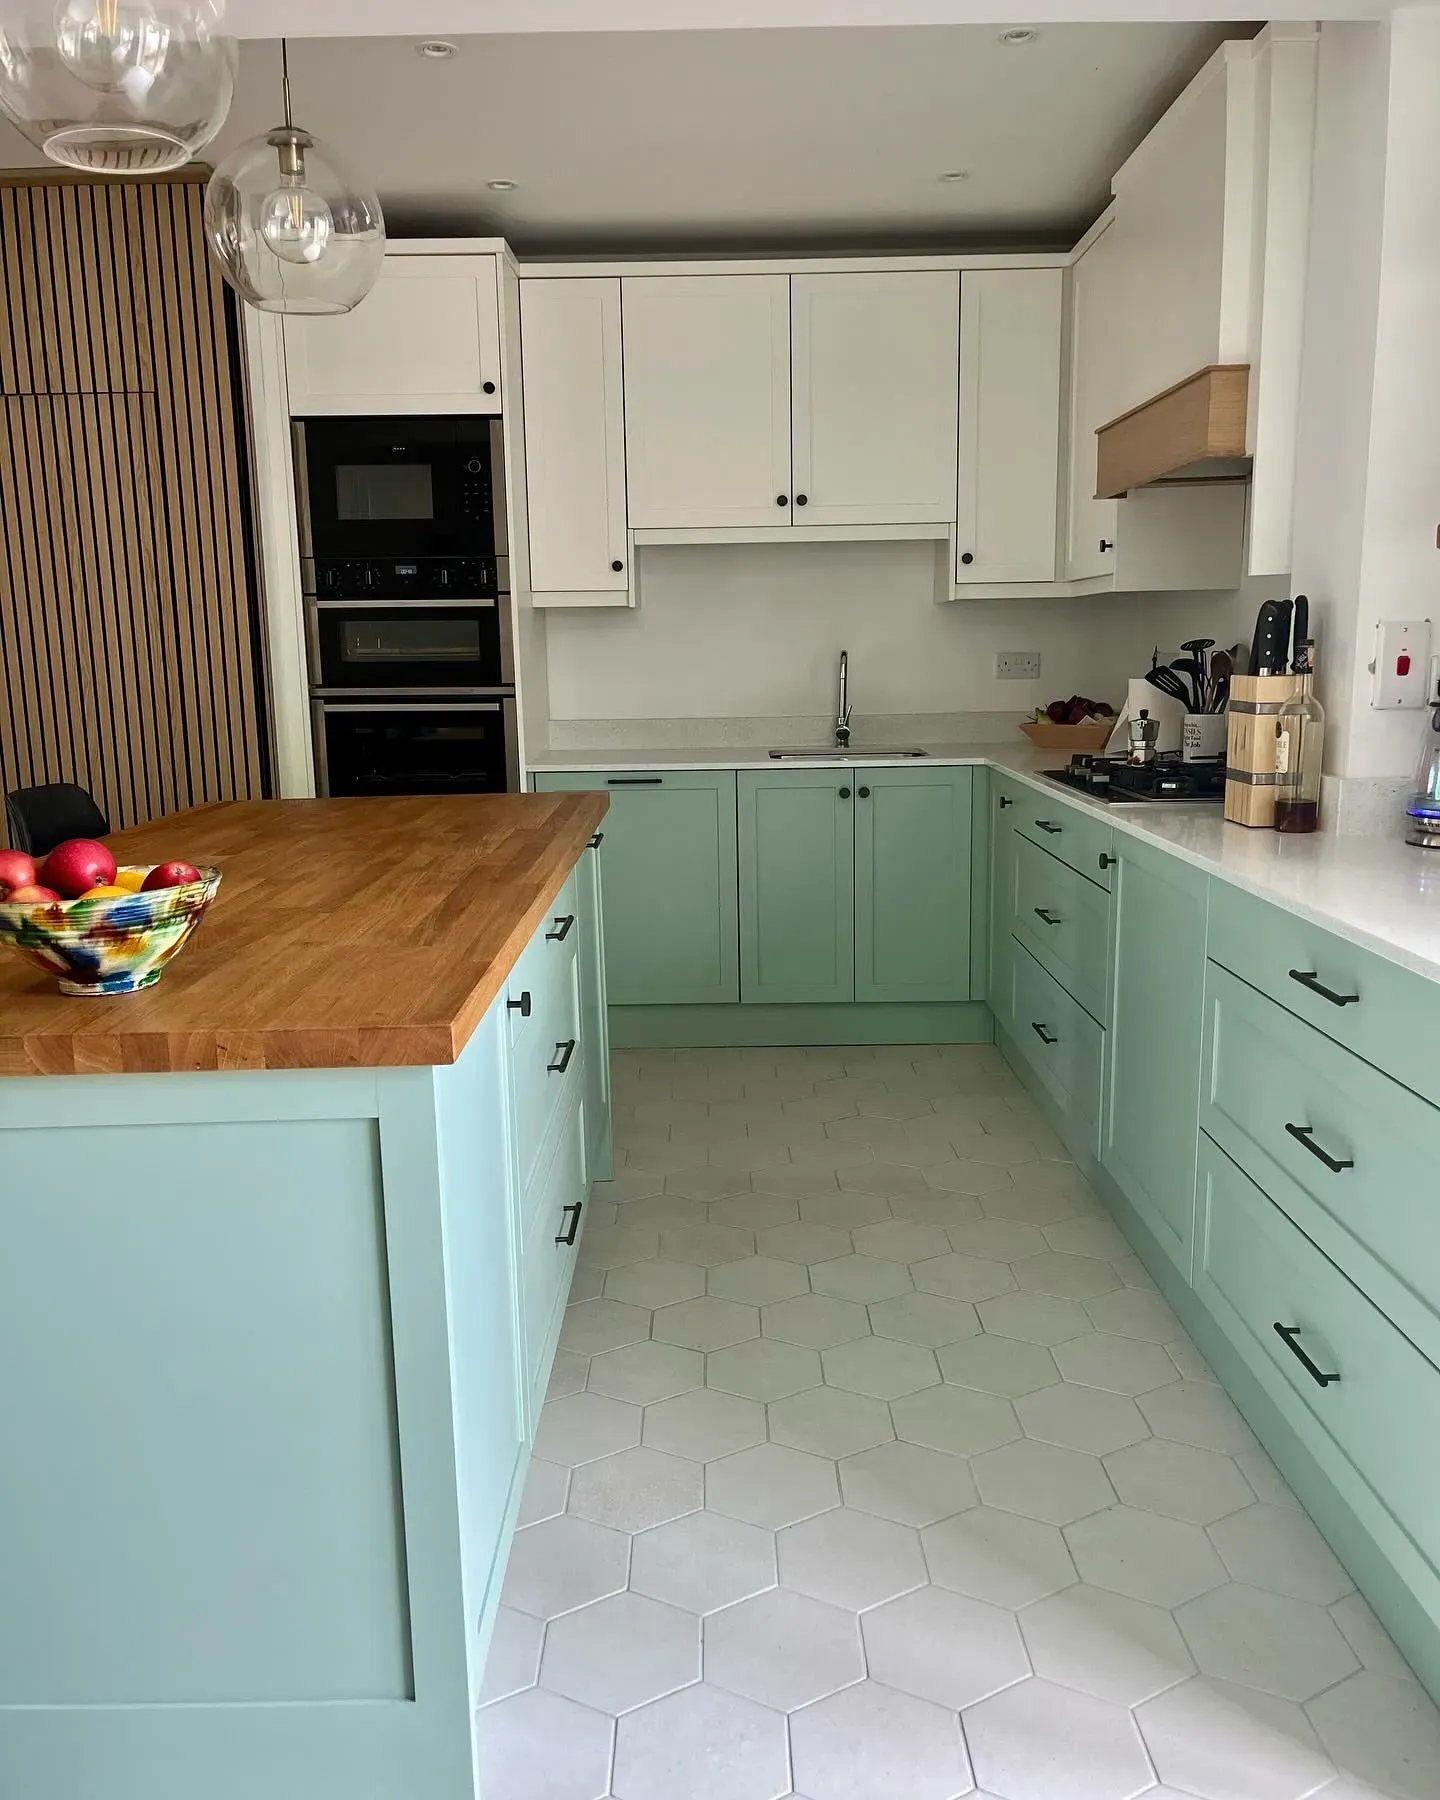 Farrow and Ball Green Blue kitchen cabinets paint